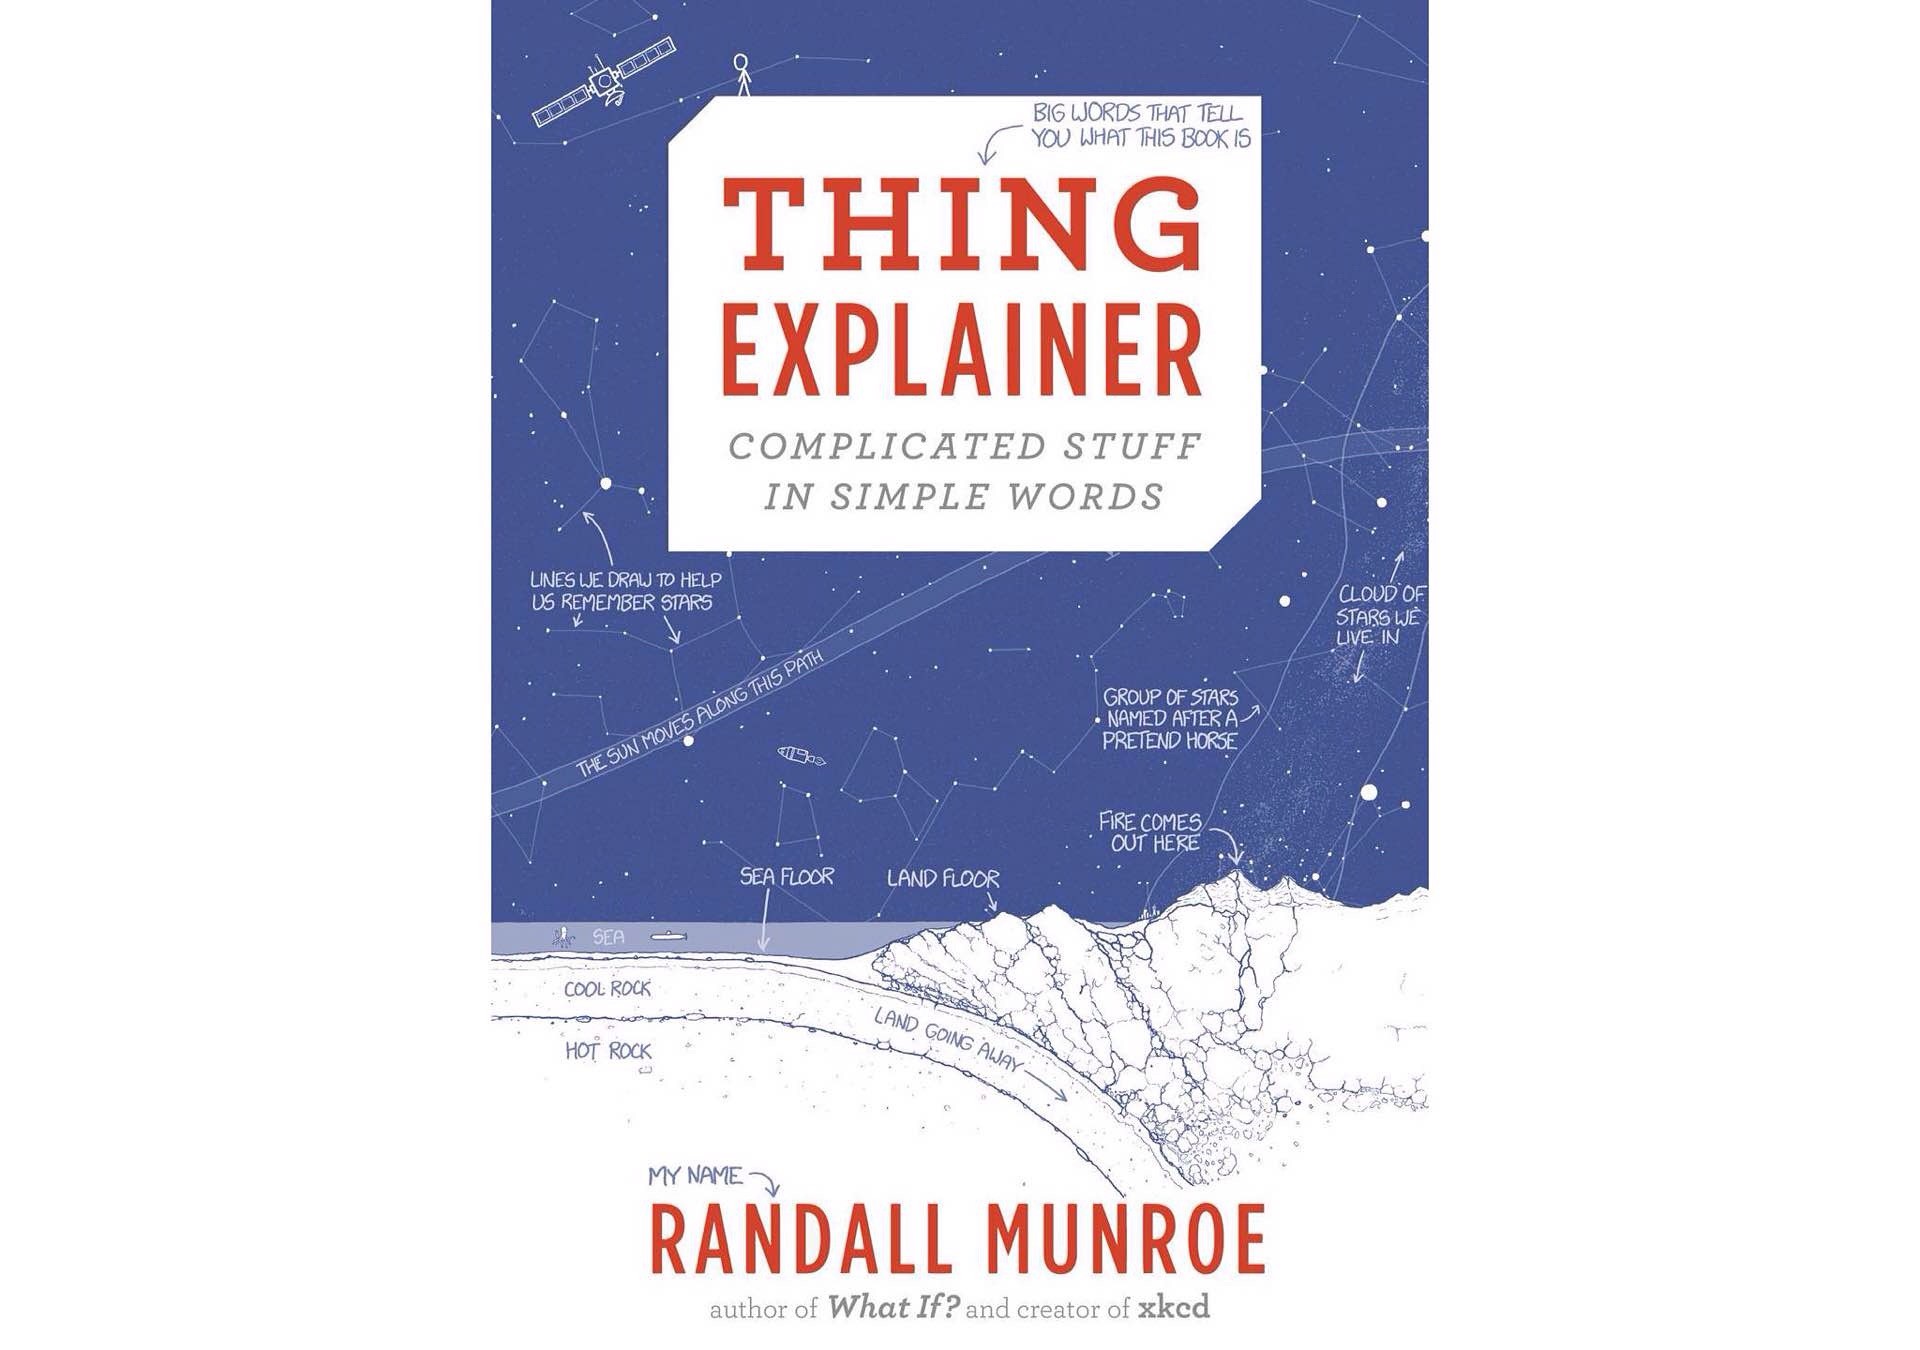 Thing Explainer by Randall Munroe. (Releases November 24th, 2015.)